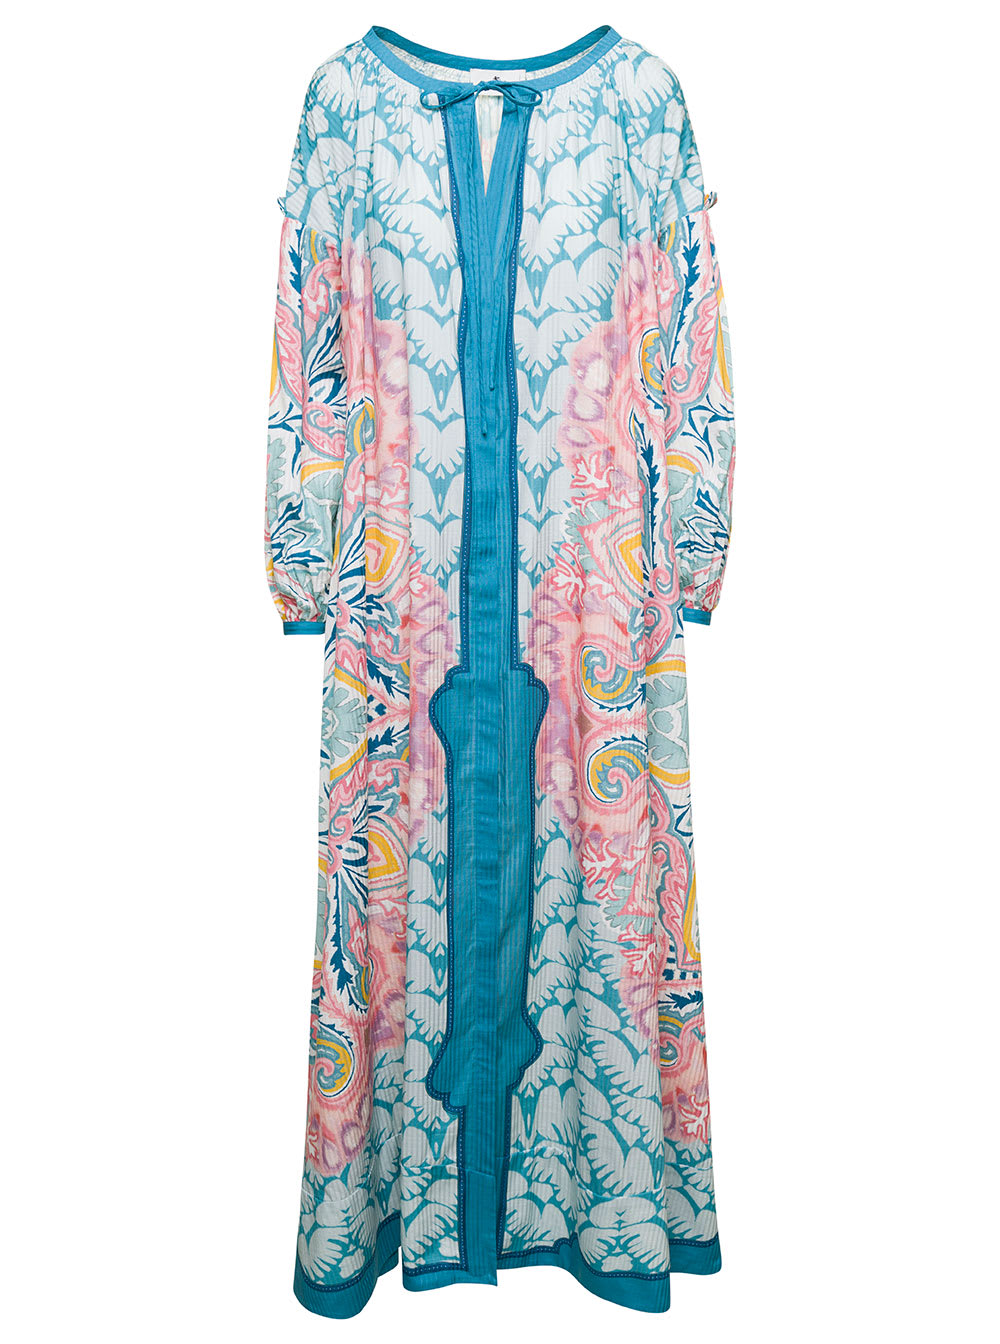 ETRO PINK AND LIHT-BLUE PAISLEY MAXI-DRESS IN COTTON BLEND WOMAN